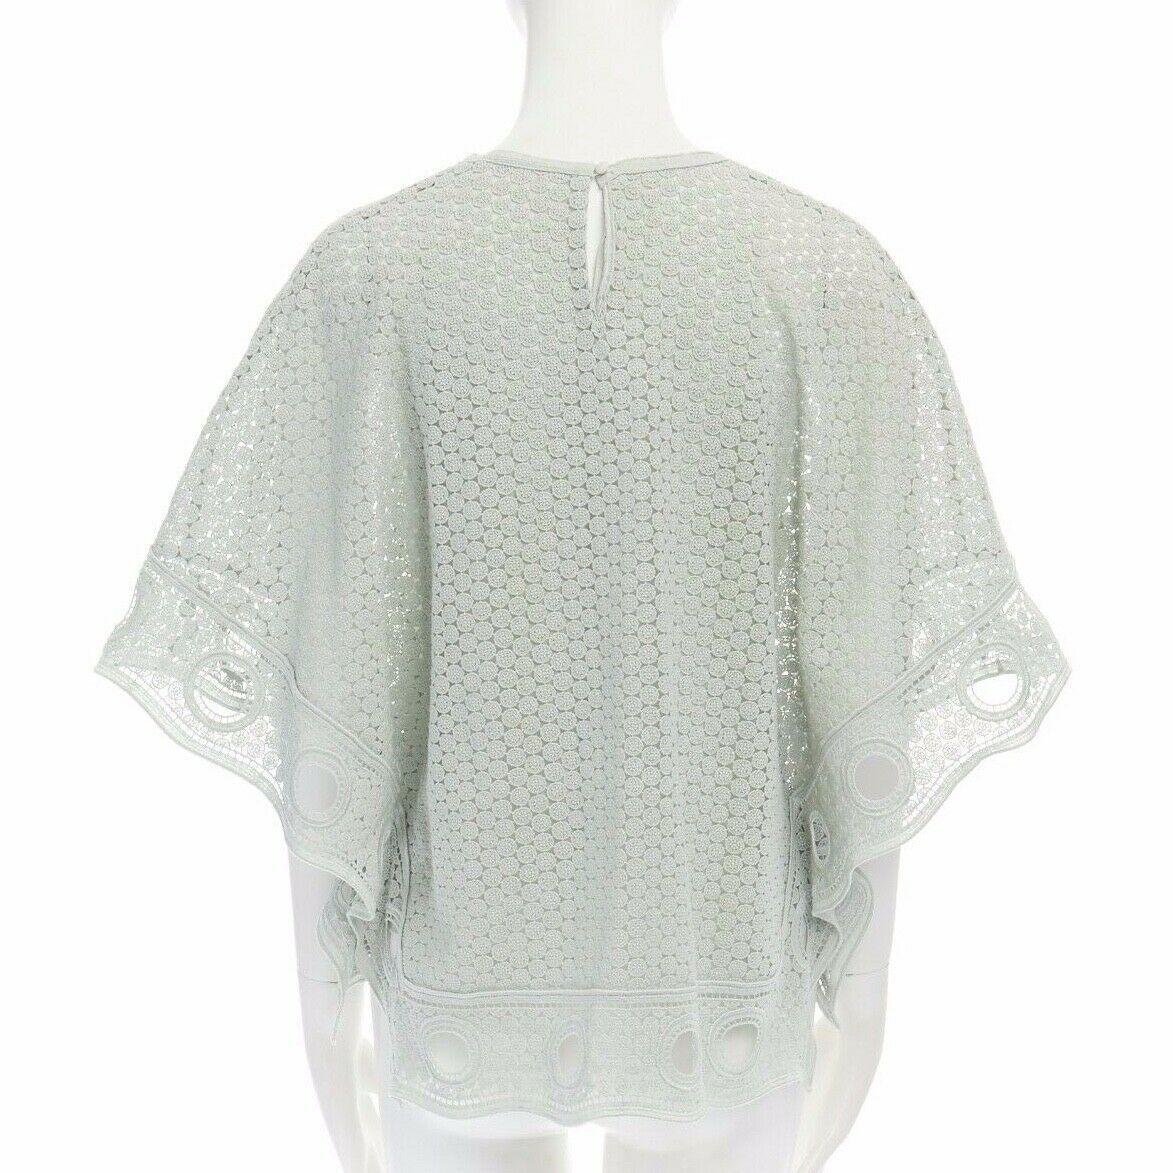 runway CHLOE SS15 teal blue crochet lace knit poncho capelet top FR36 US4 UK8 S 2